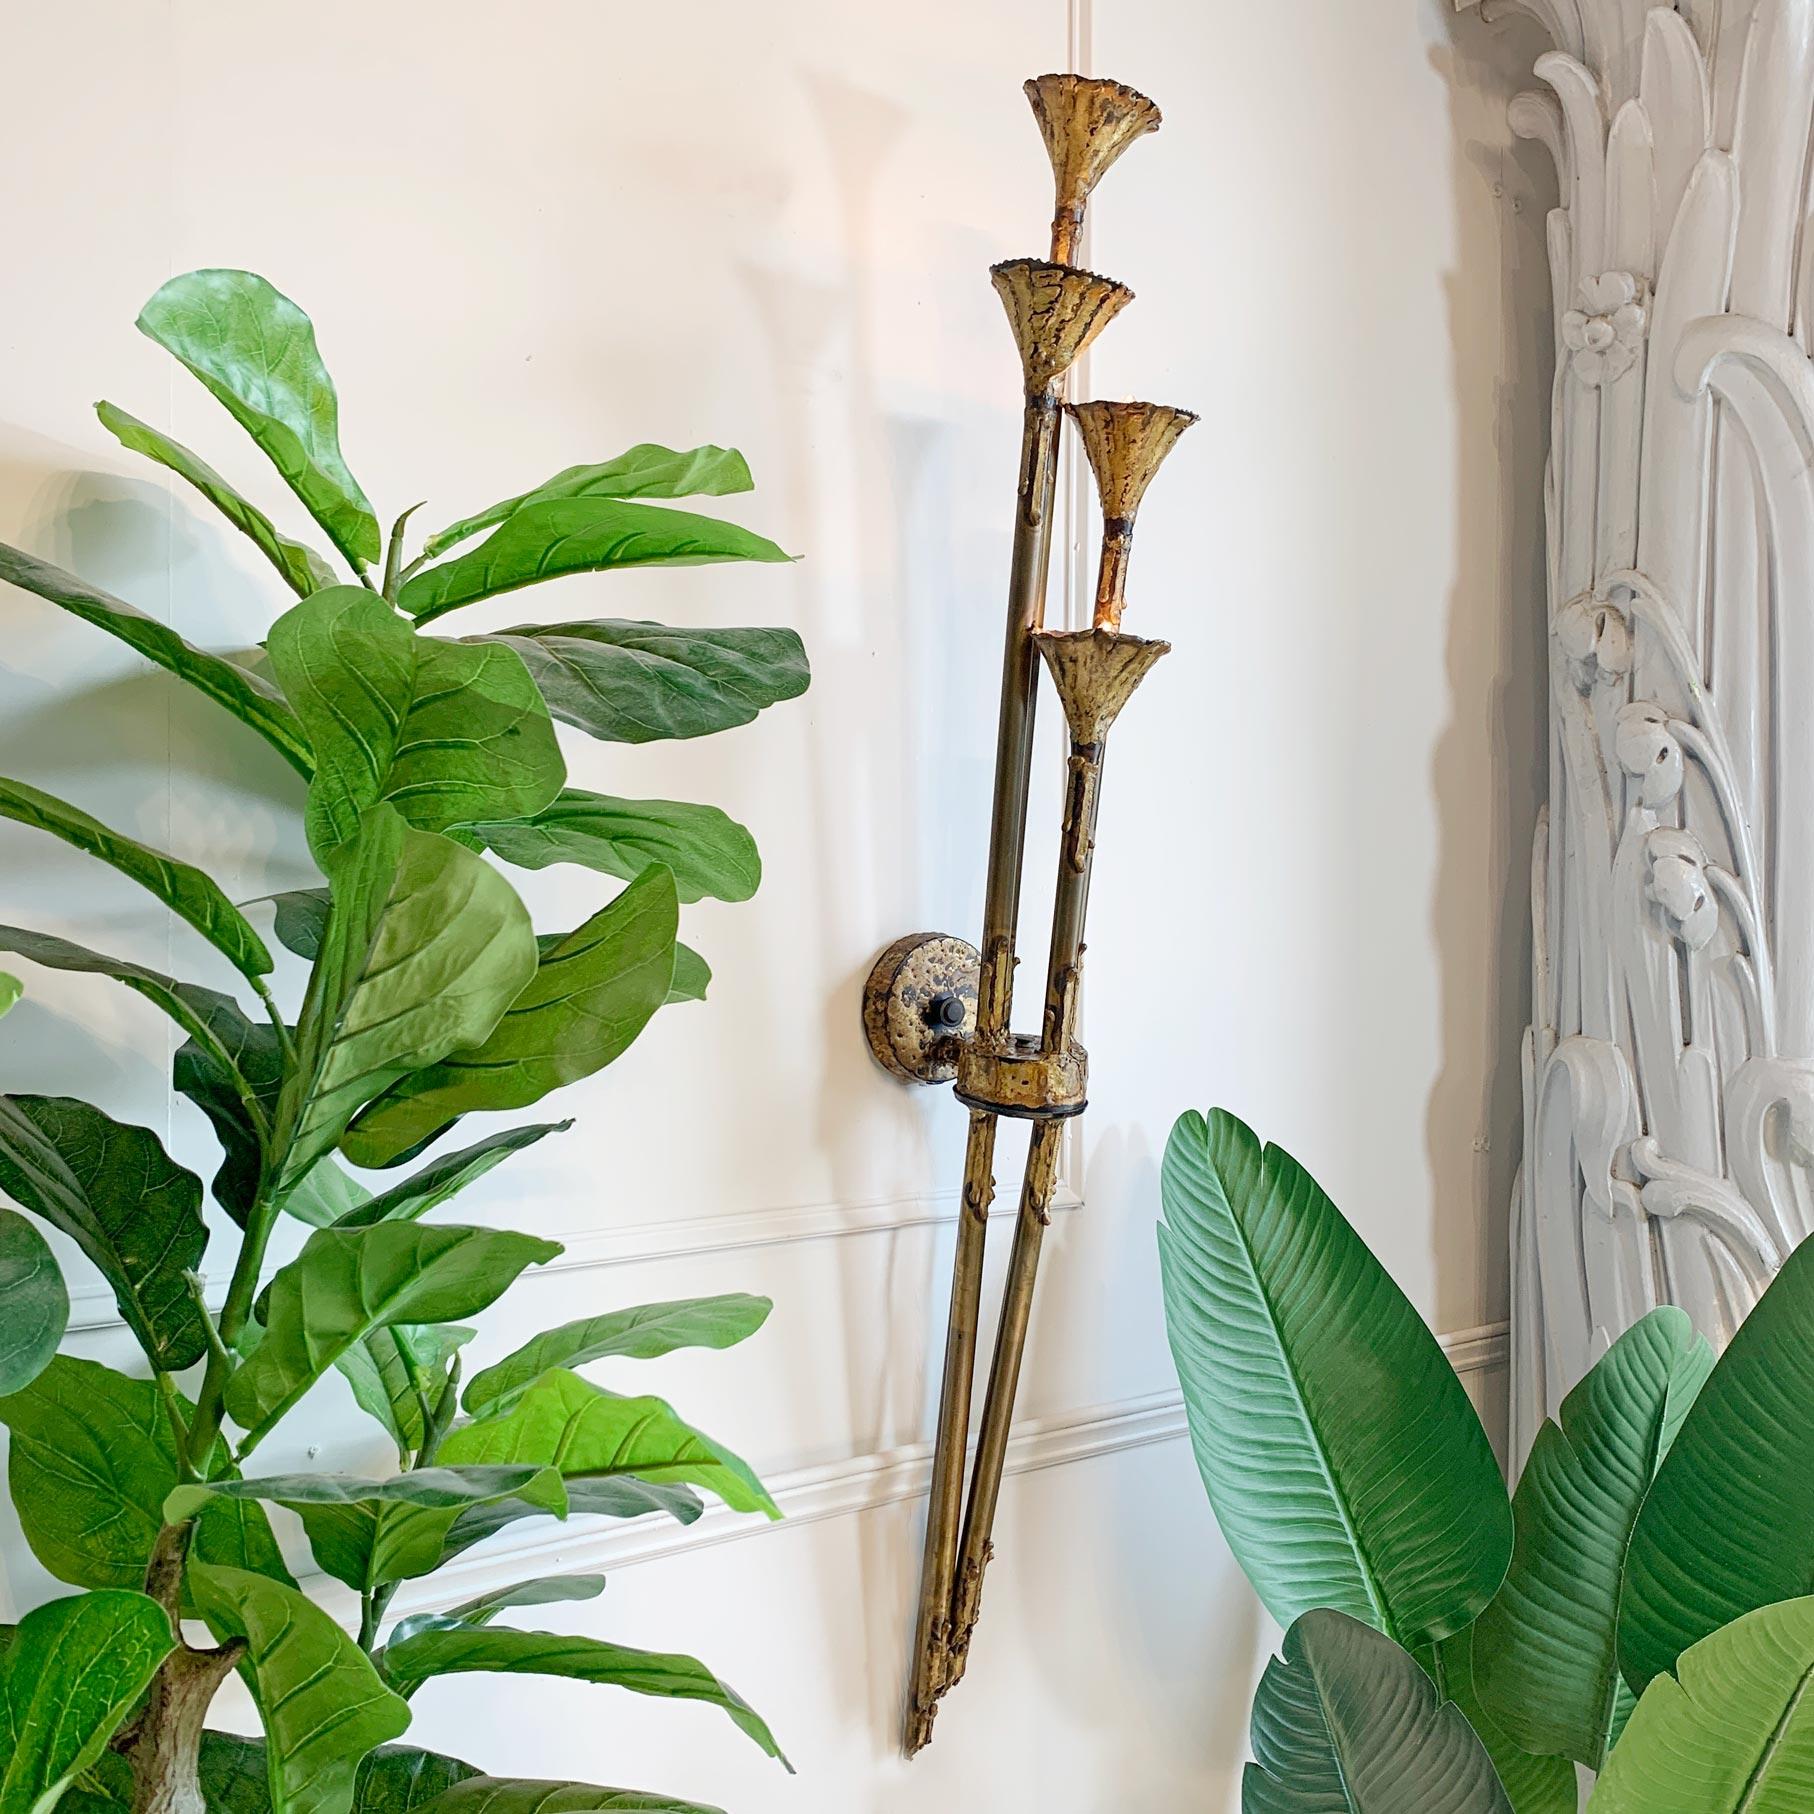 An outstanding Brutalist movement handcrafted torch cut brass torchiere wall light by Tom Greene, circa 1970. This architectural and sculptural wall light for The Feldman Company has 4 trumpet lamp holders, each with a single E12 bulb holder.

Of